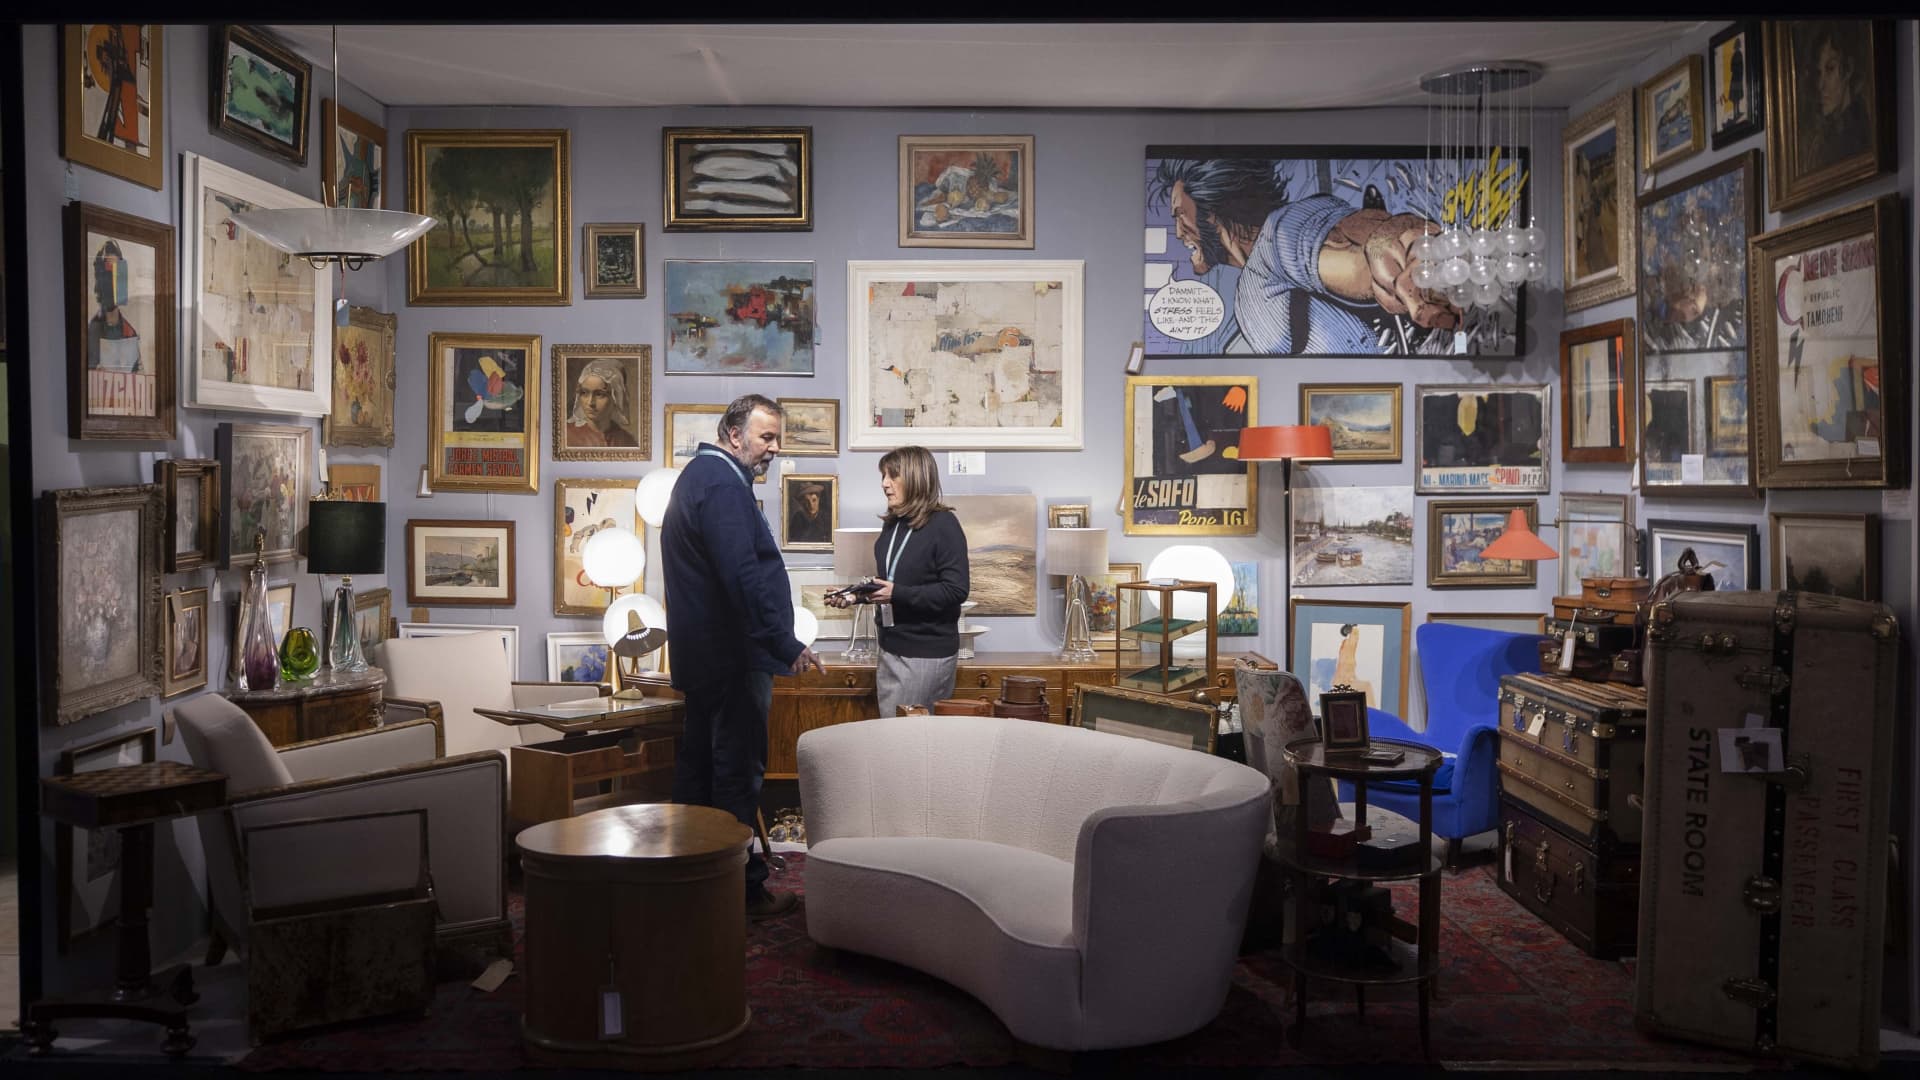 The Decorative Fair held in Battersea Park, London, on January 26, 2023. The event, where dealers exhibit, is held three times a year and has been running since 1985.